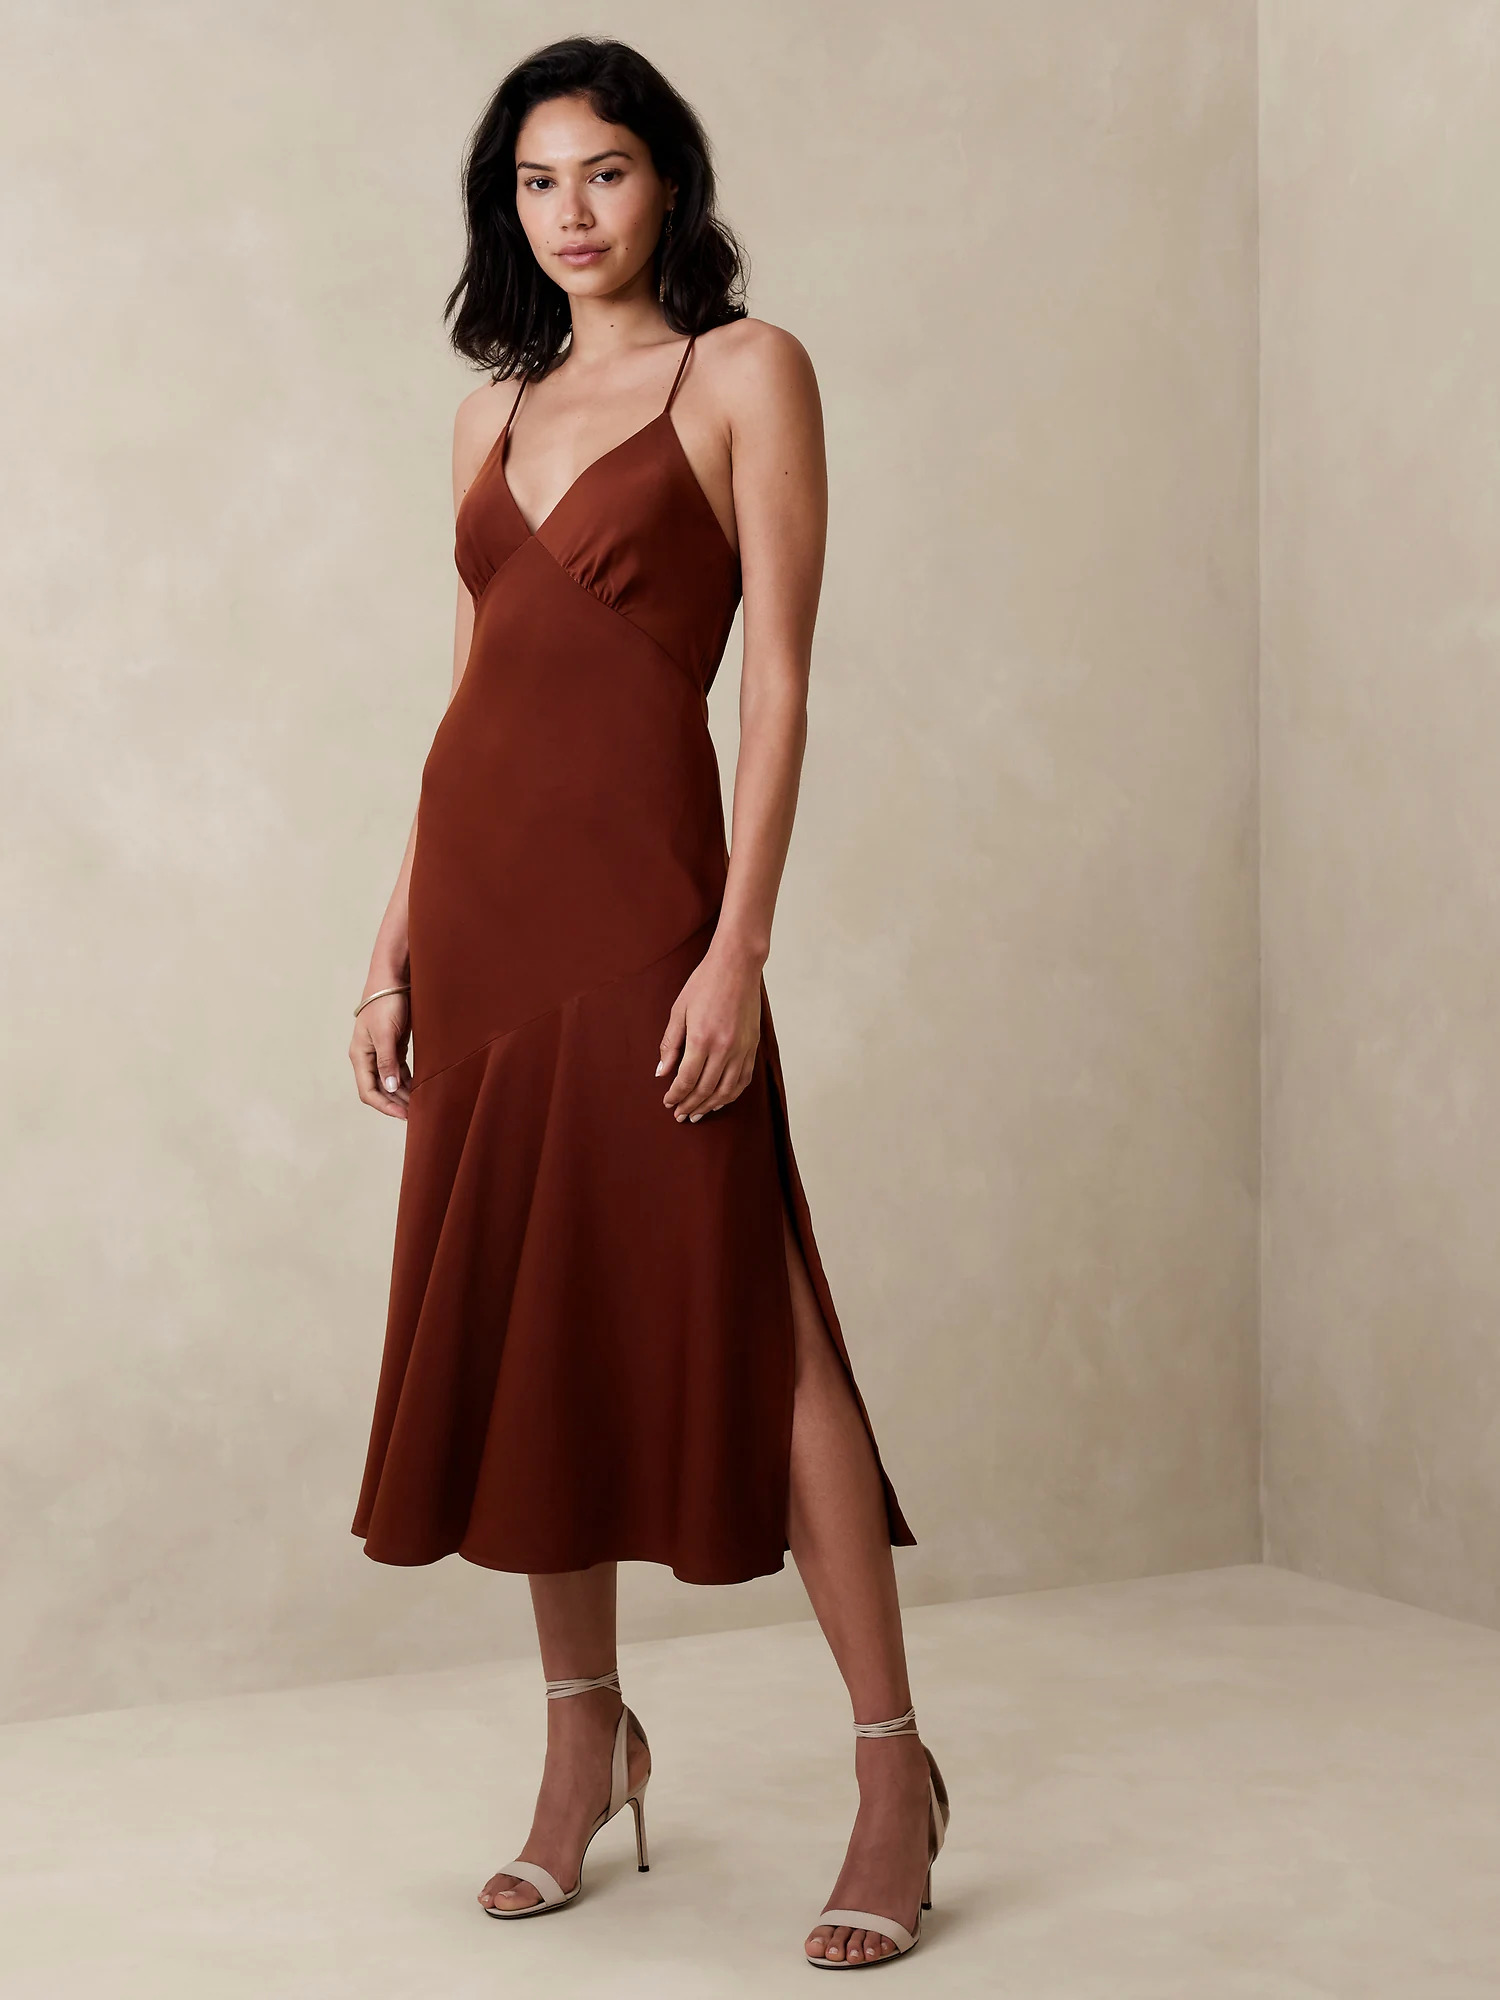 Banana Republic Factory 50% Off Everything + Extra 20% Off Purchases: Women's Asymmetrical Seam Midi Slip Dress $44 & More + Free Shipping on $50+